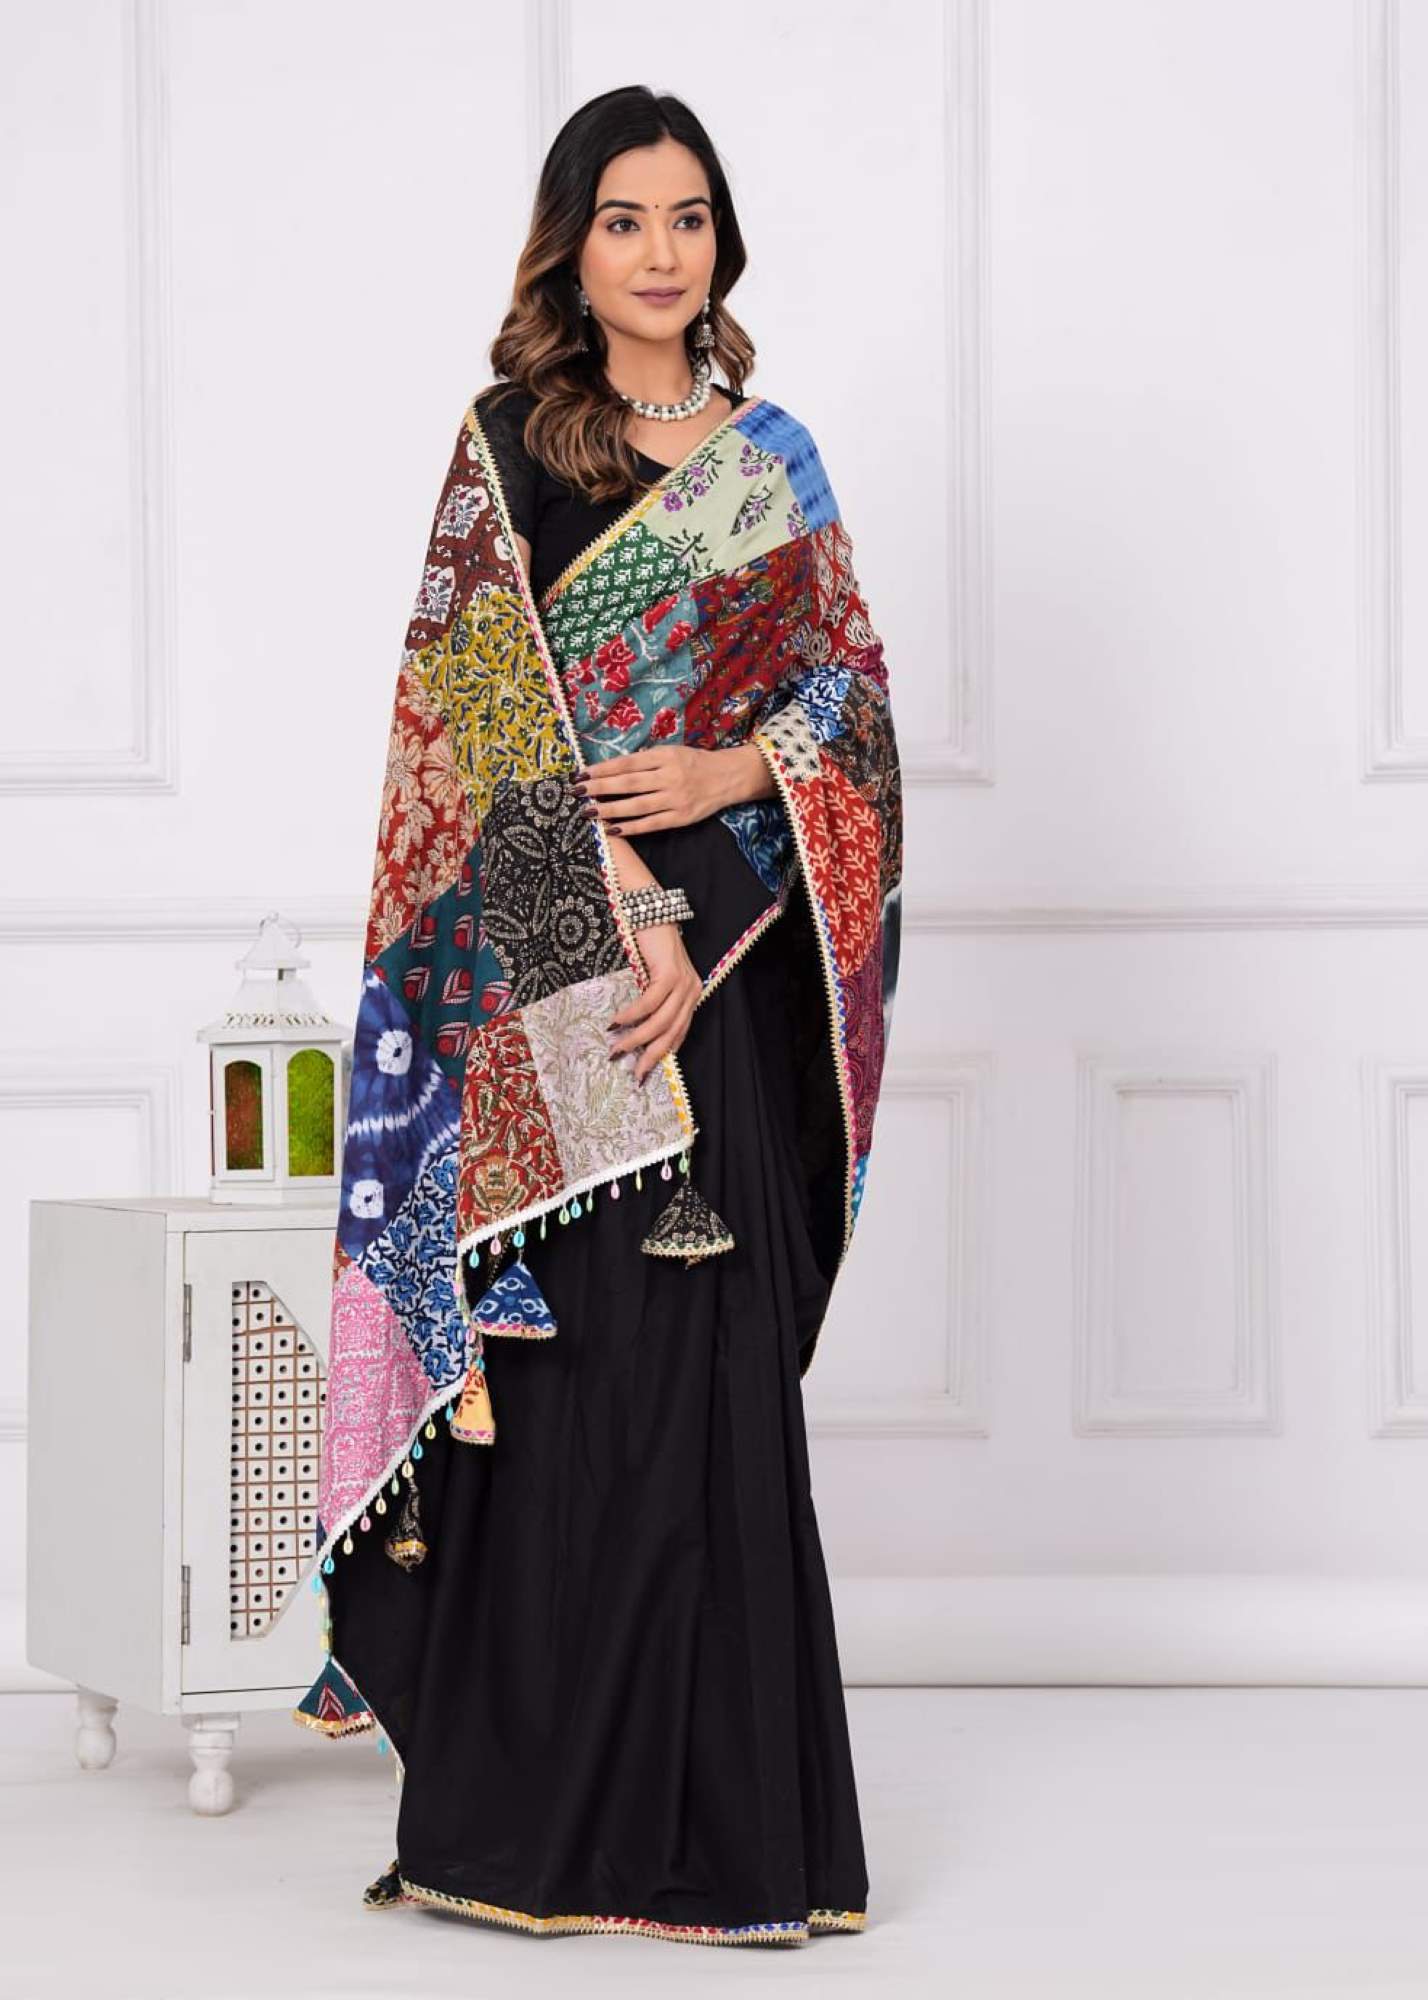 Designer Vibrant Patch Work Saree With Styles Tassels on  Pallu  Pure Cotton Ready To Wear Saree